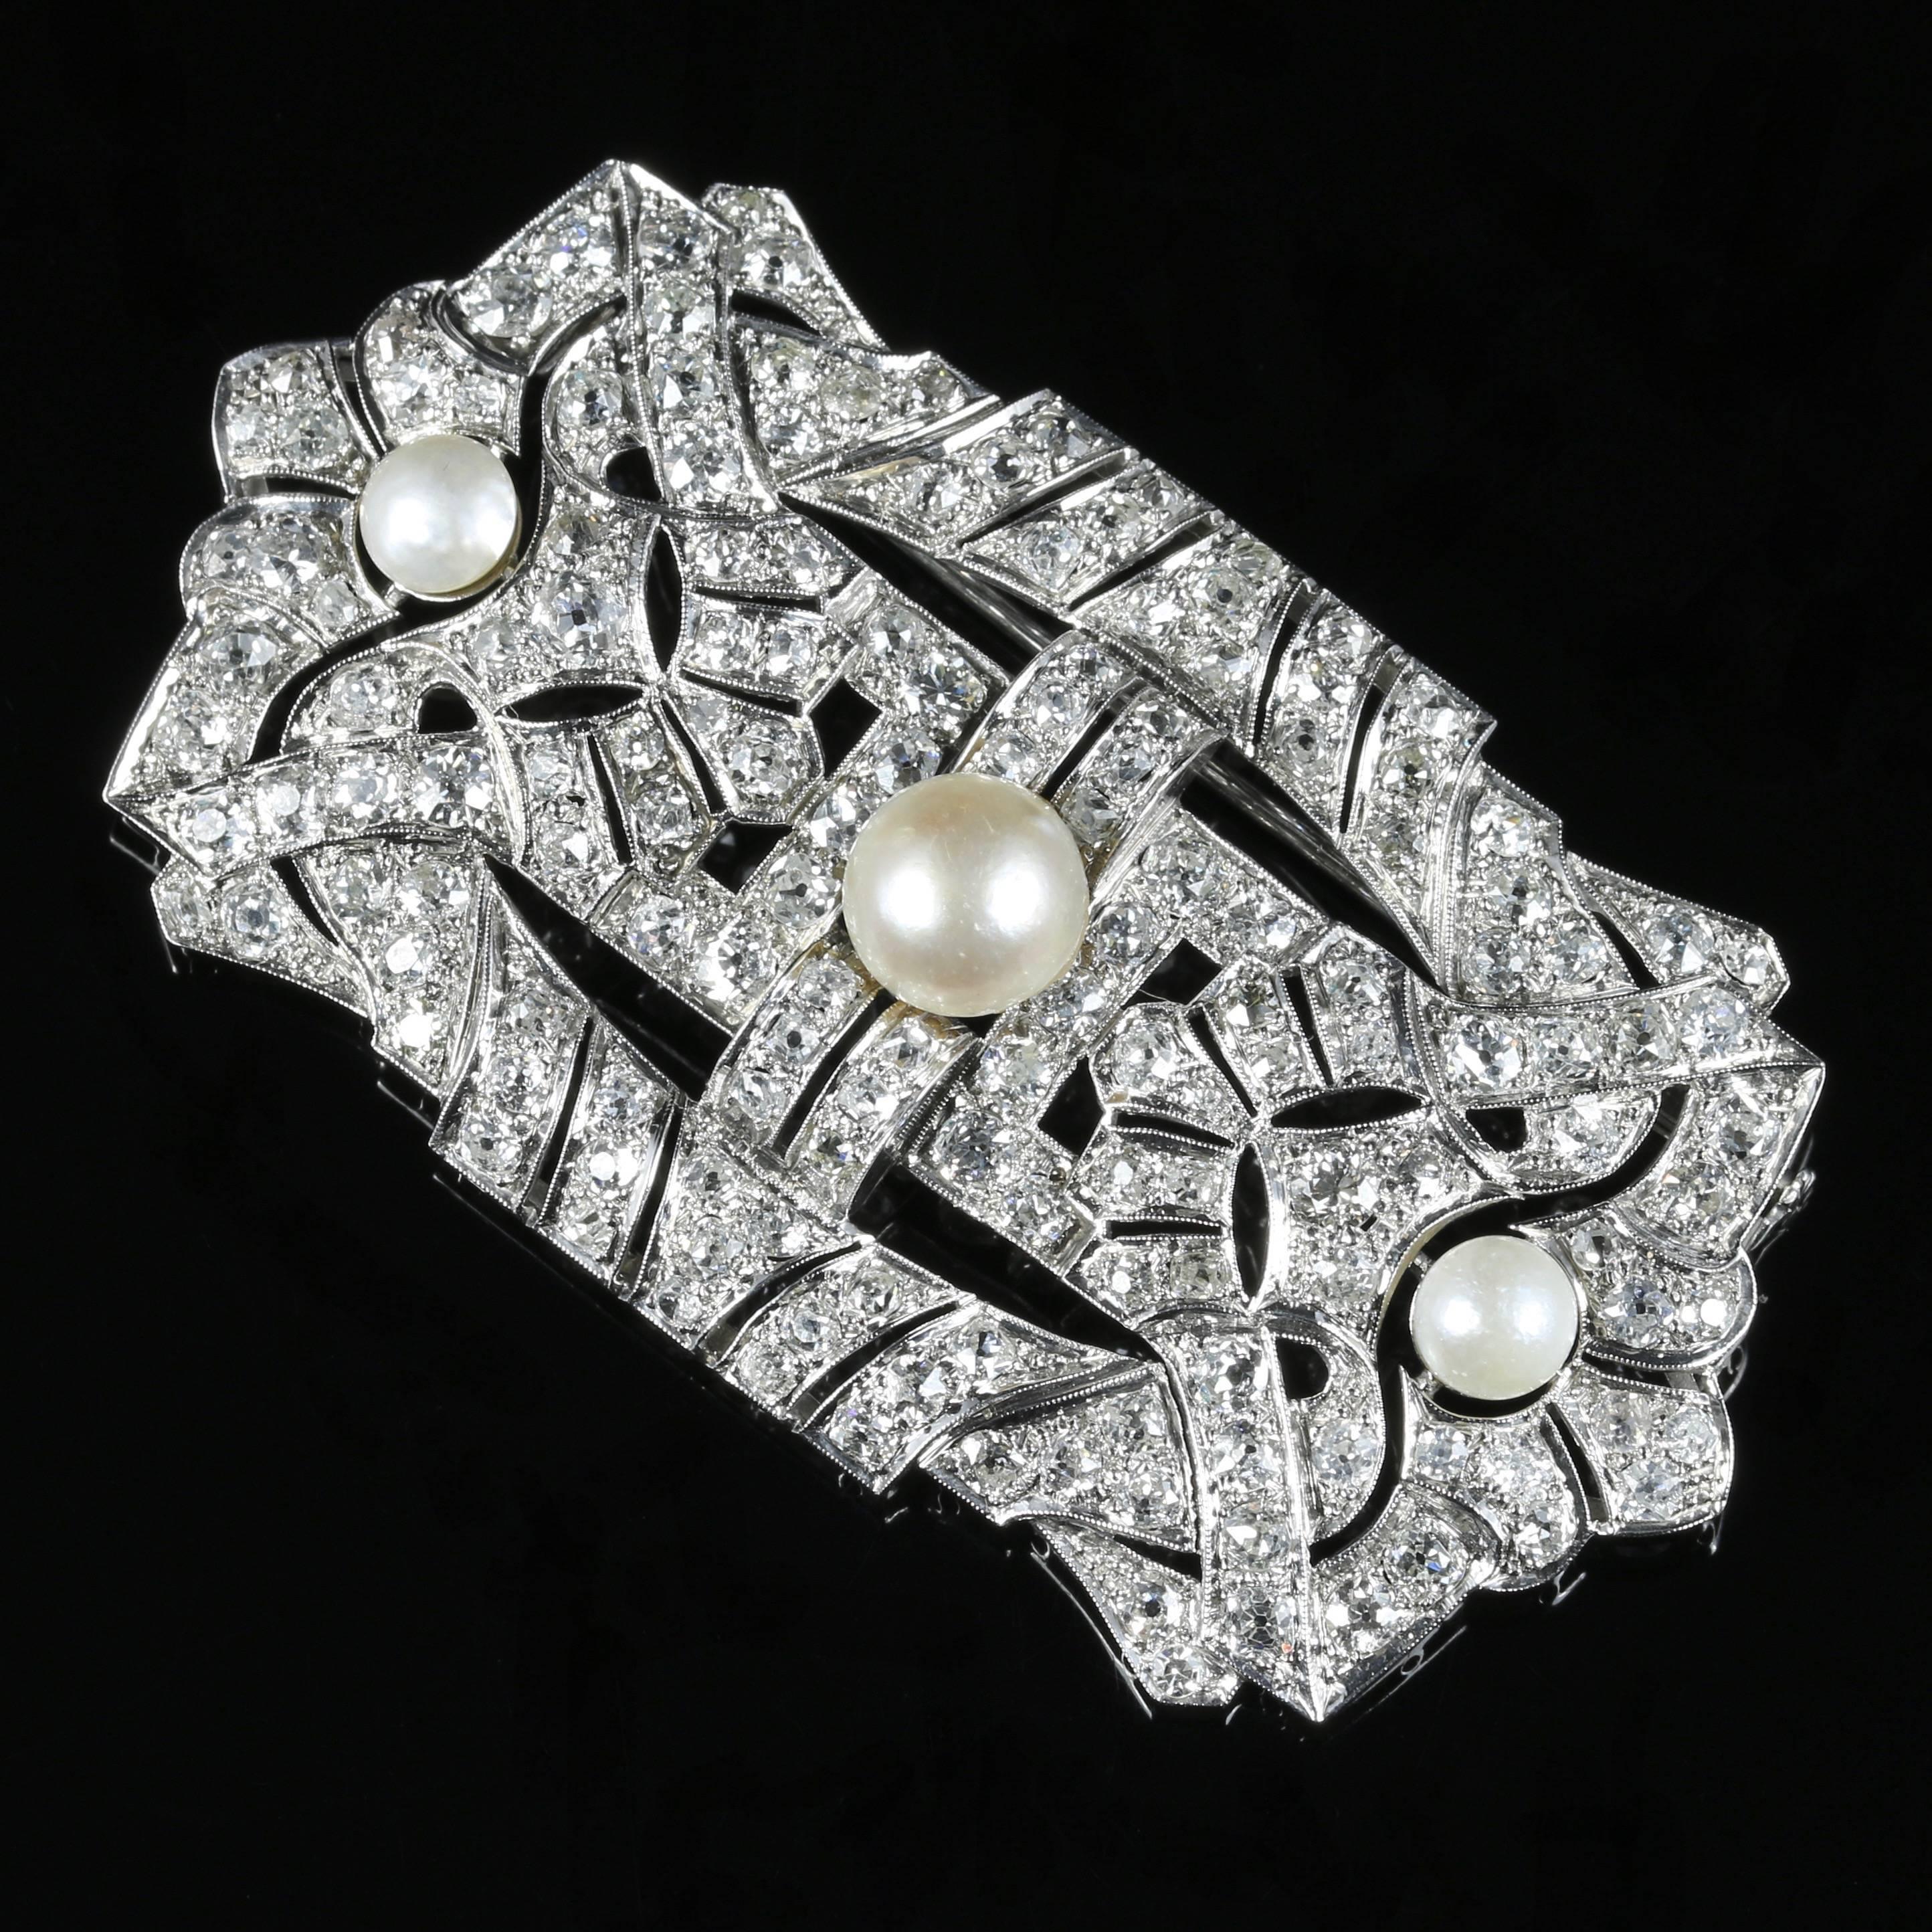 This is outstanding, a large fabulous 1920's Diamond brooch which is adorned with Diamonds and three beautiful Pearls.

There are approx. 140 Diamonds and each Diamond is approx. 0.08ct, giving a total of 11ct 20 points.

The Diamonds are all full